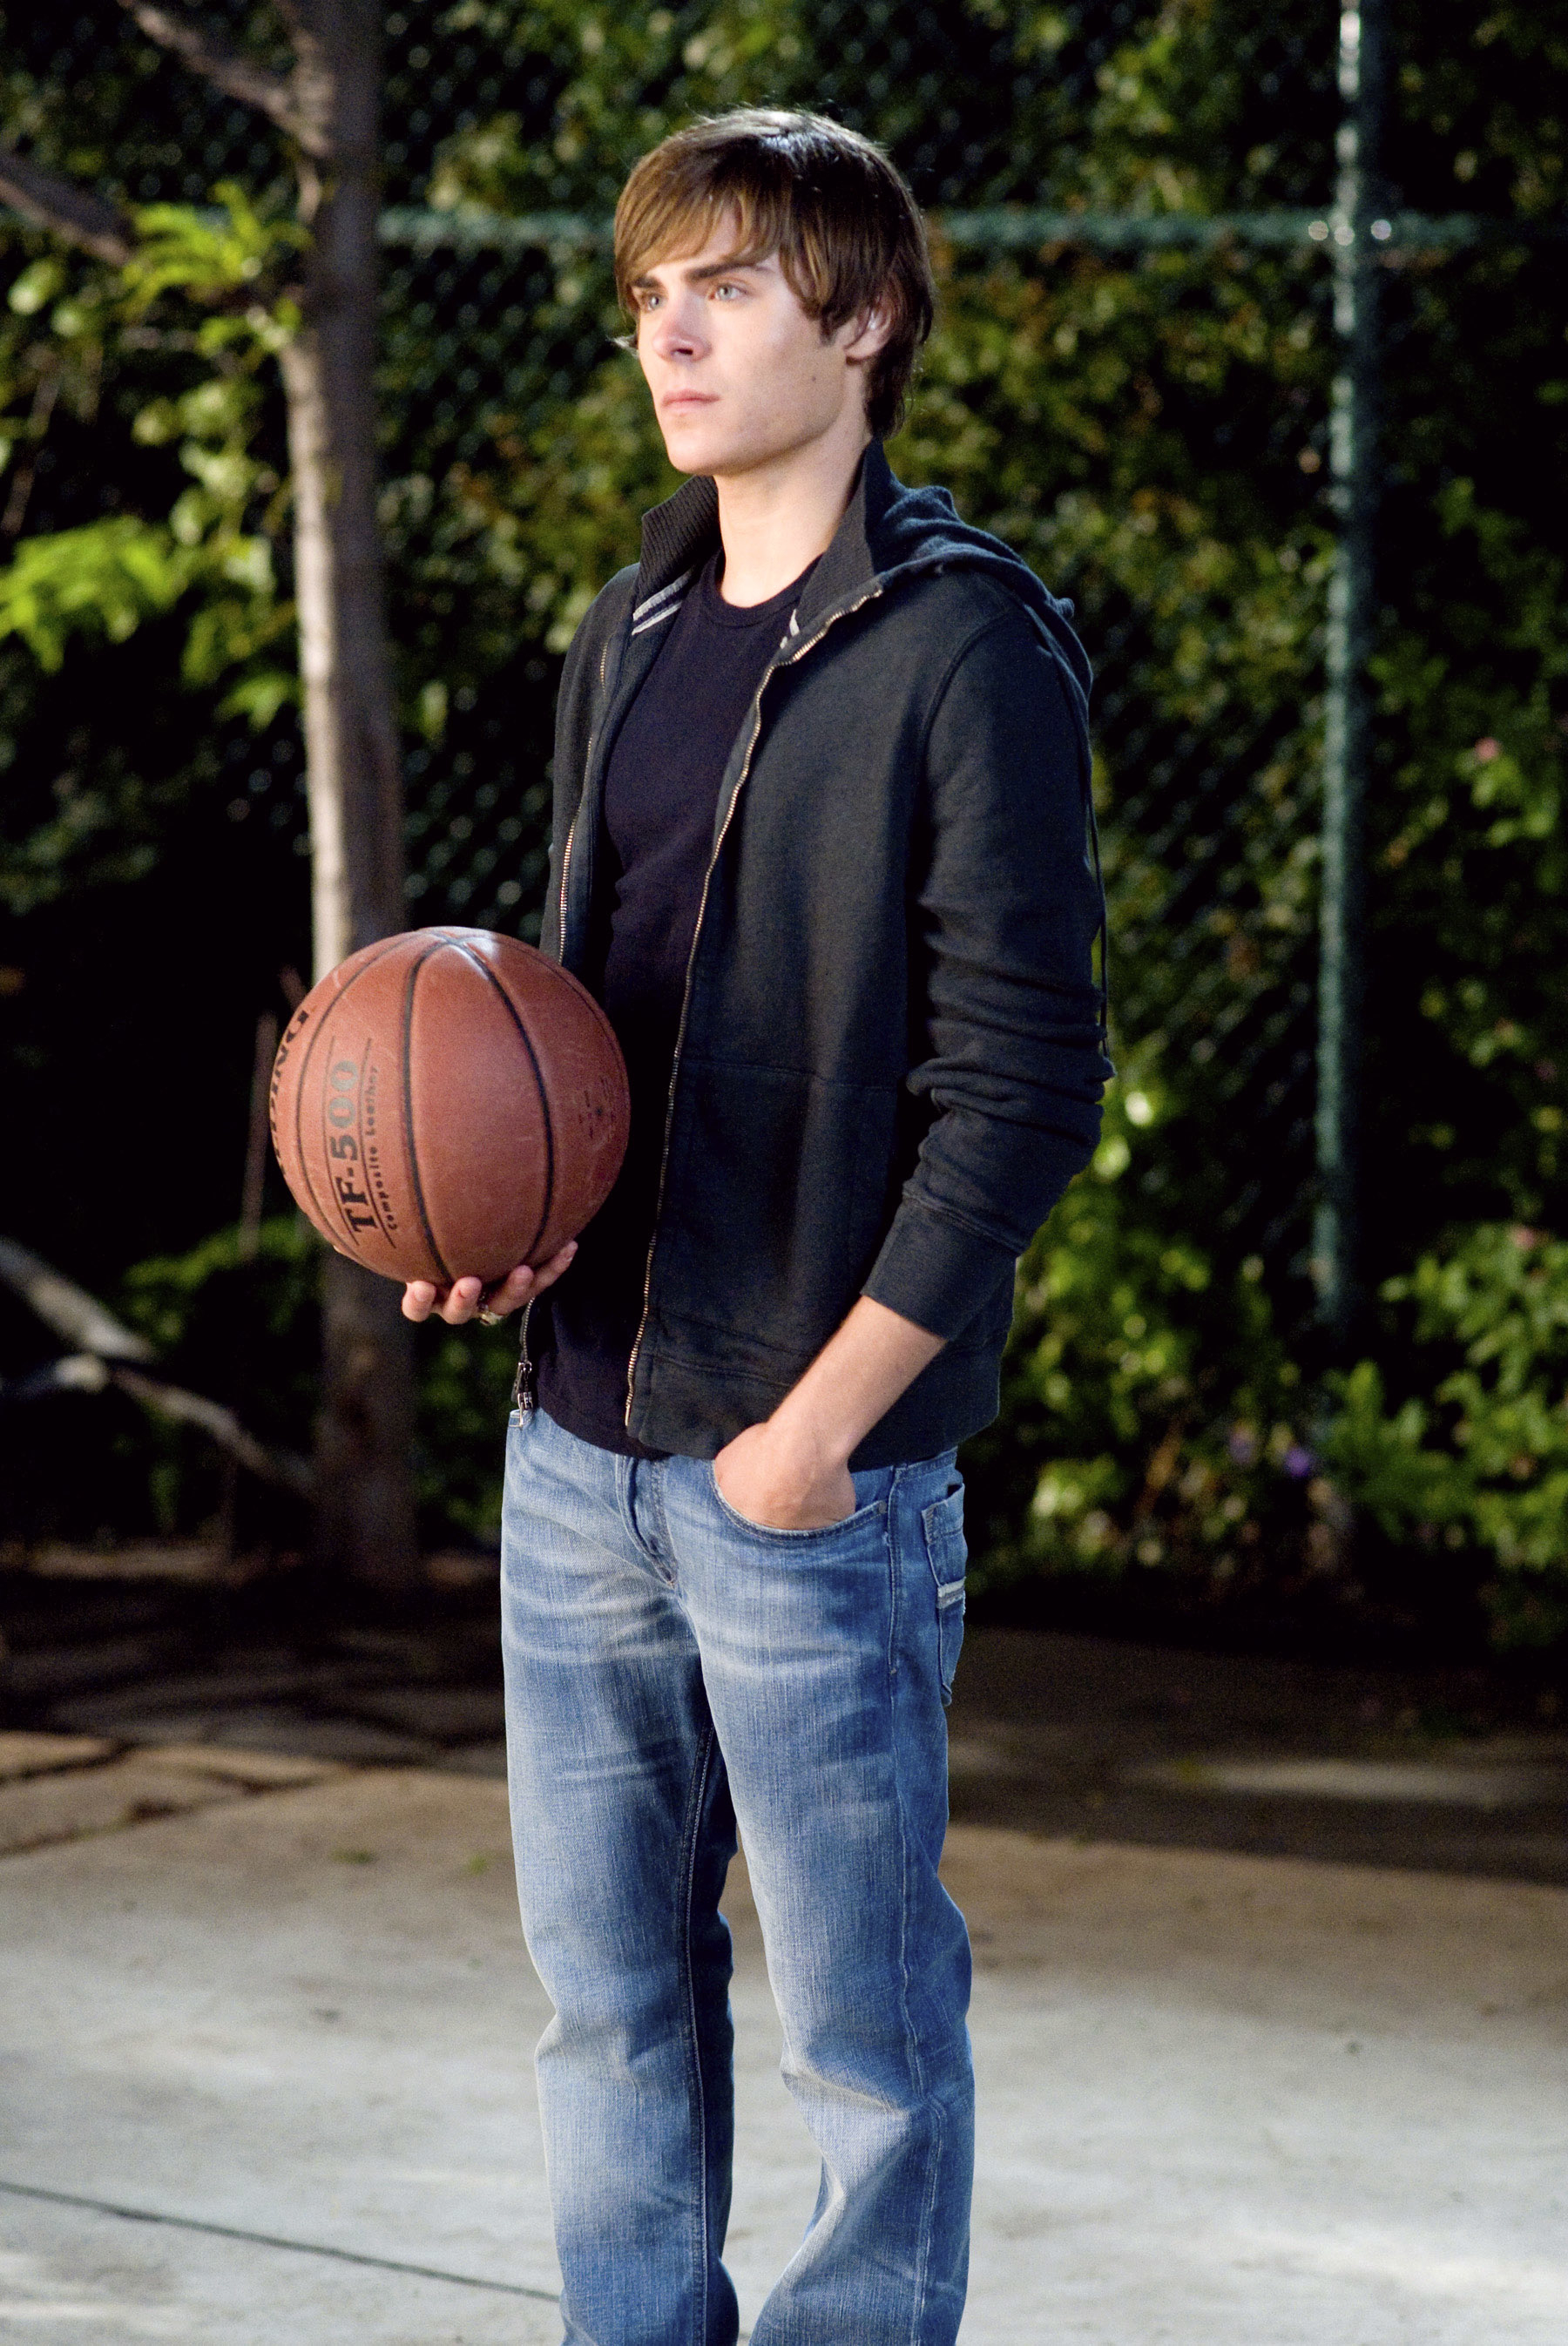 Zac holding a basketball in a scene from &quot;High School Musical&quot;